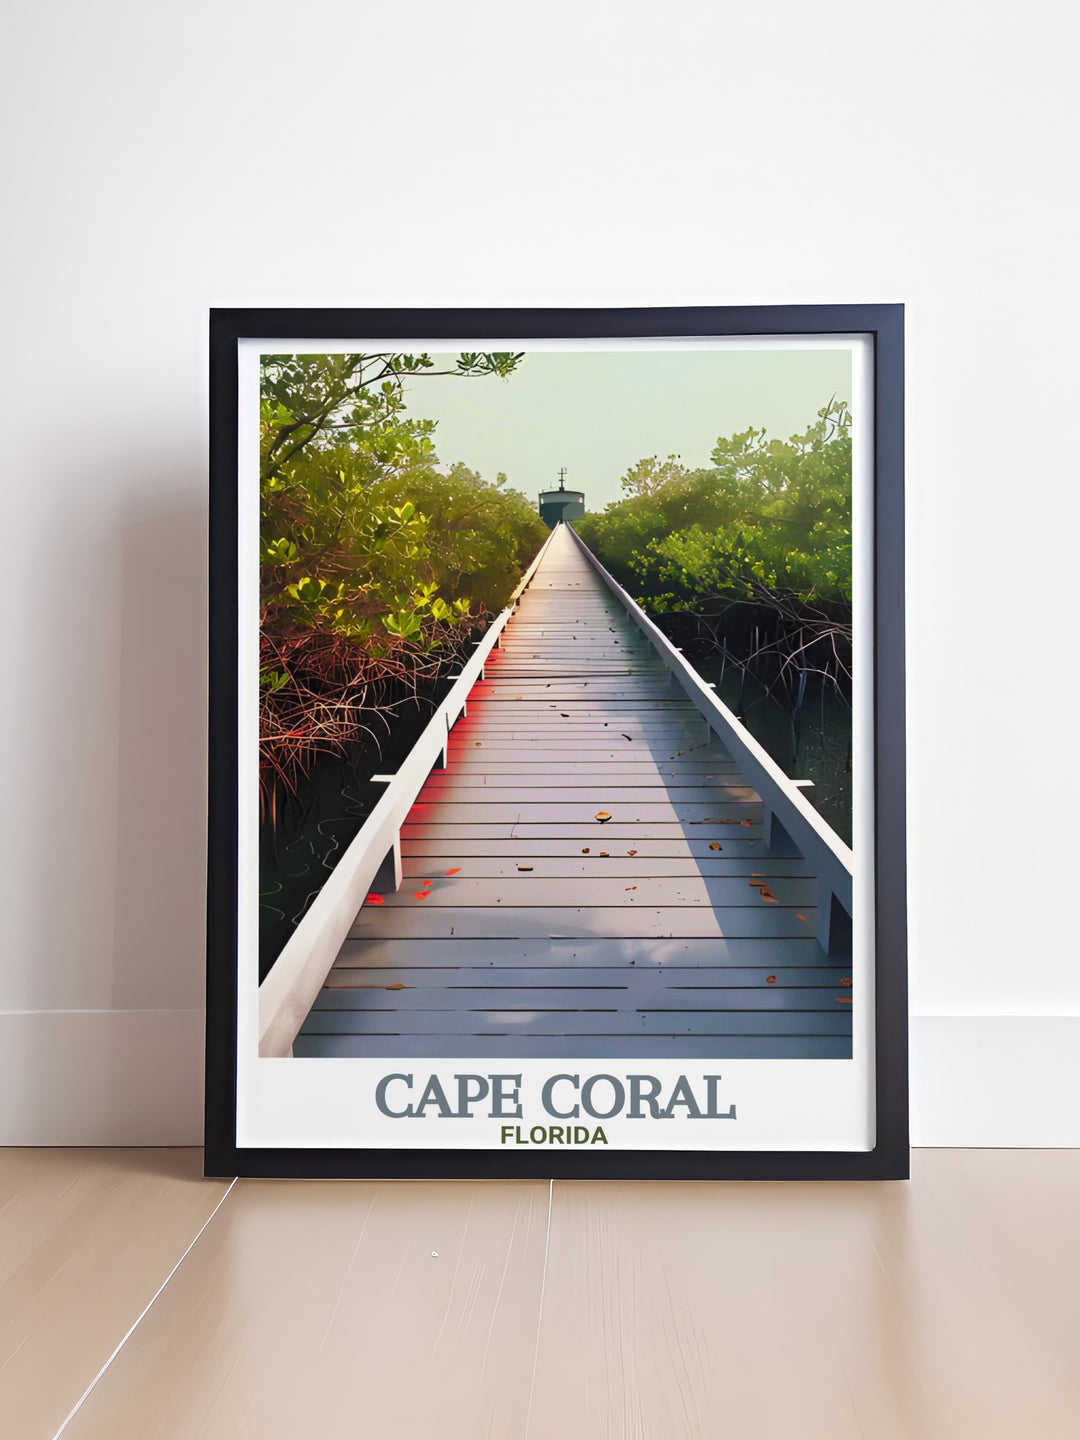 Beautiful Florida Poster of Glover Bight Trail ideal for enhancing your living space with vivid colors and tranquil scenes from Cape Coral perfect gift for anyone who appreciates nature and travel.